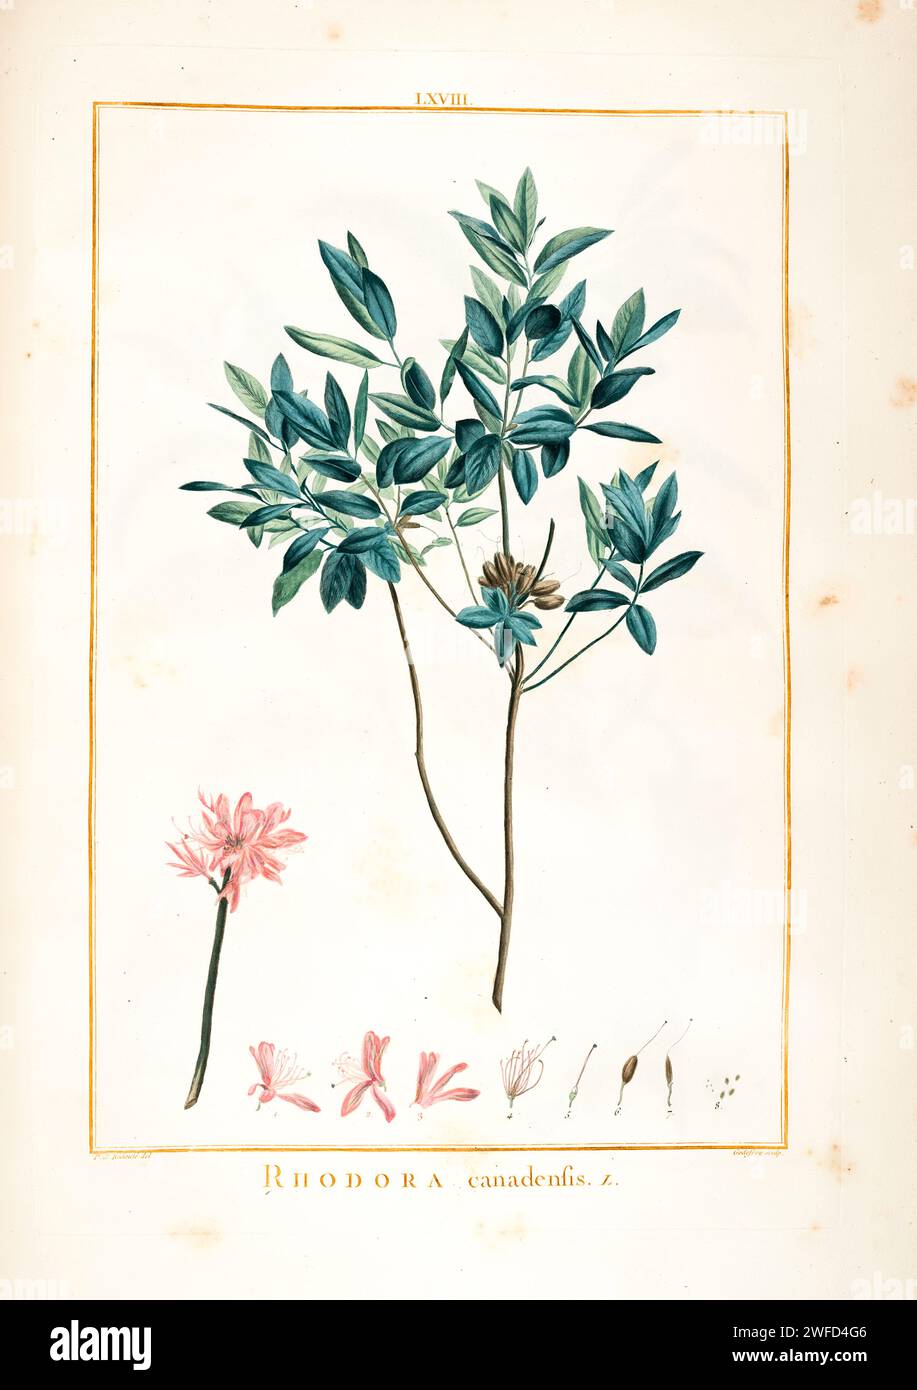 Rhododendron canadense here as Rhodora canadensis Hand Painted by Pierre-Joseph Redouté and published in Stirpes Novae aut Minus Cognitae (1784) by Charles Louis L'Héritier de Brutelle. Rhododendron canadense, the rhodora or Canada rosebay, is a deciduous flowering shrub that is native to northeastern North America Stock Photo